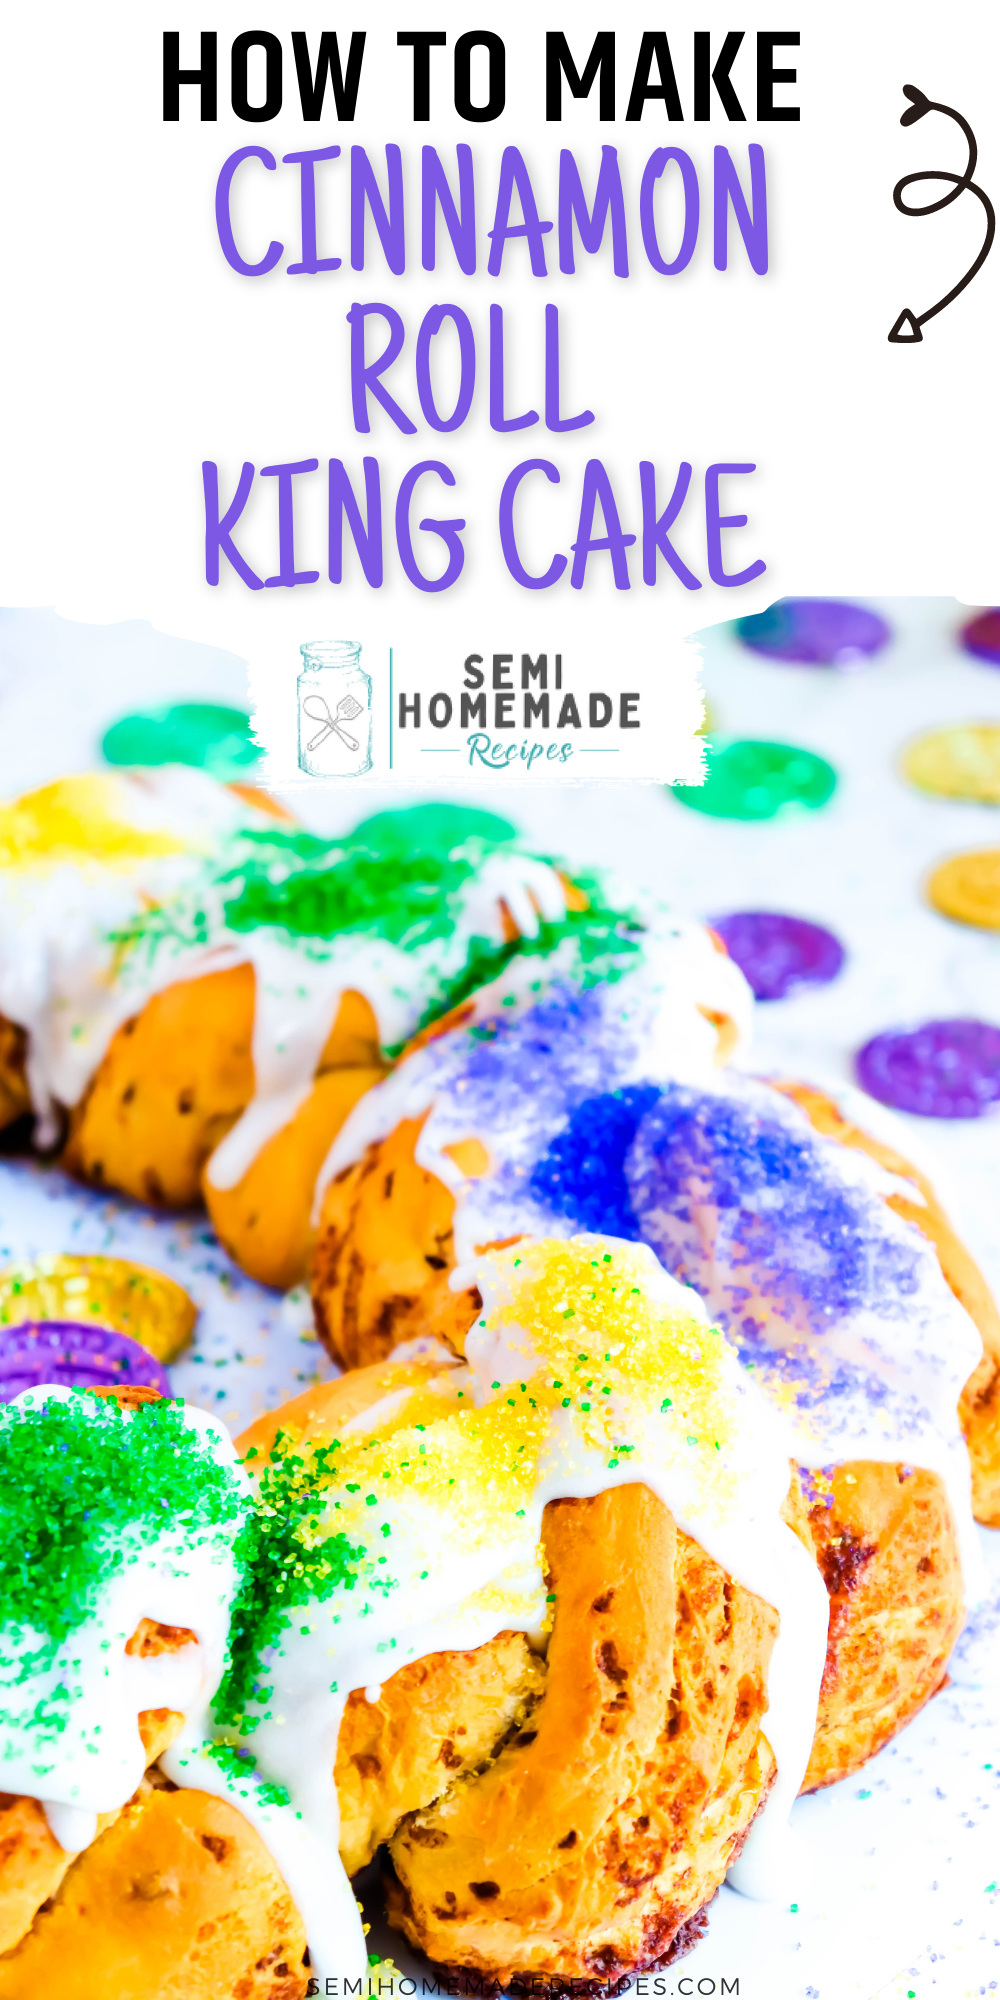 Celebrate Mardi Gras at home with this fun and Easy Cinnamon Roll King Cake! Made with cinnamon rolls, topping with icing and Mardi Gras color themed sugar for easiest king cake ever! 